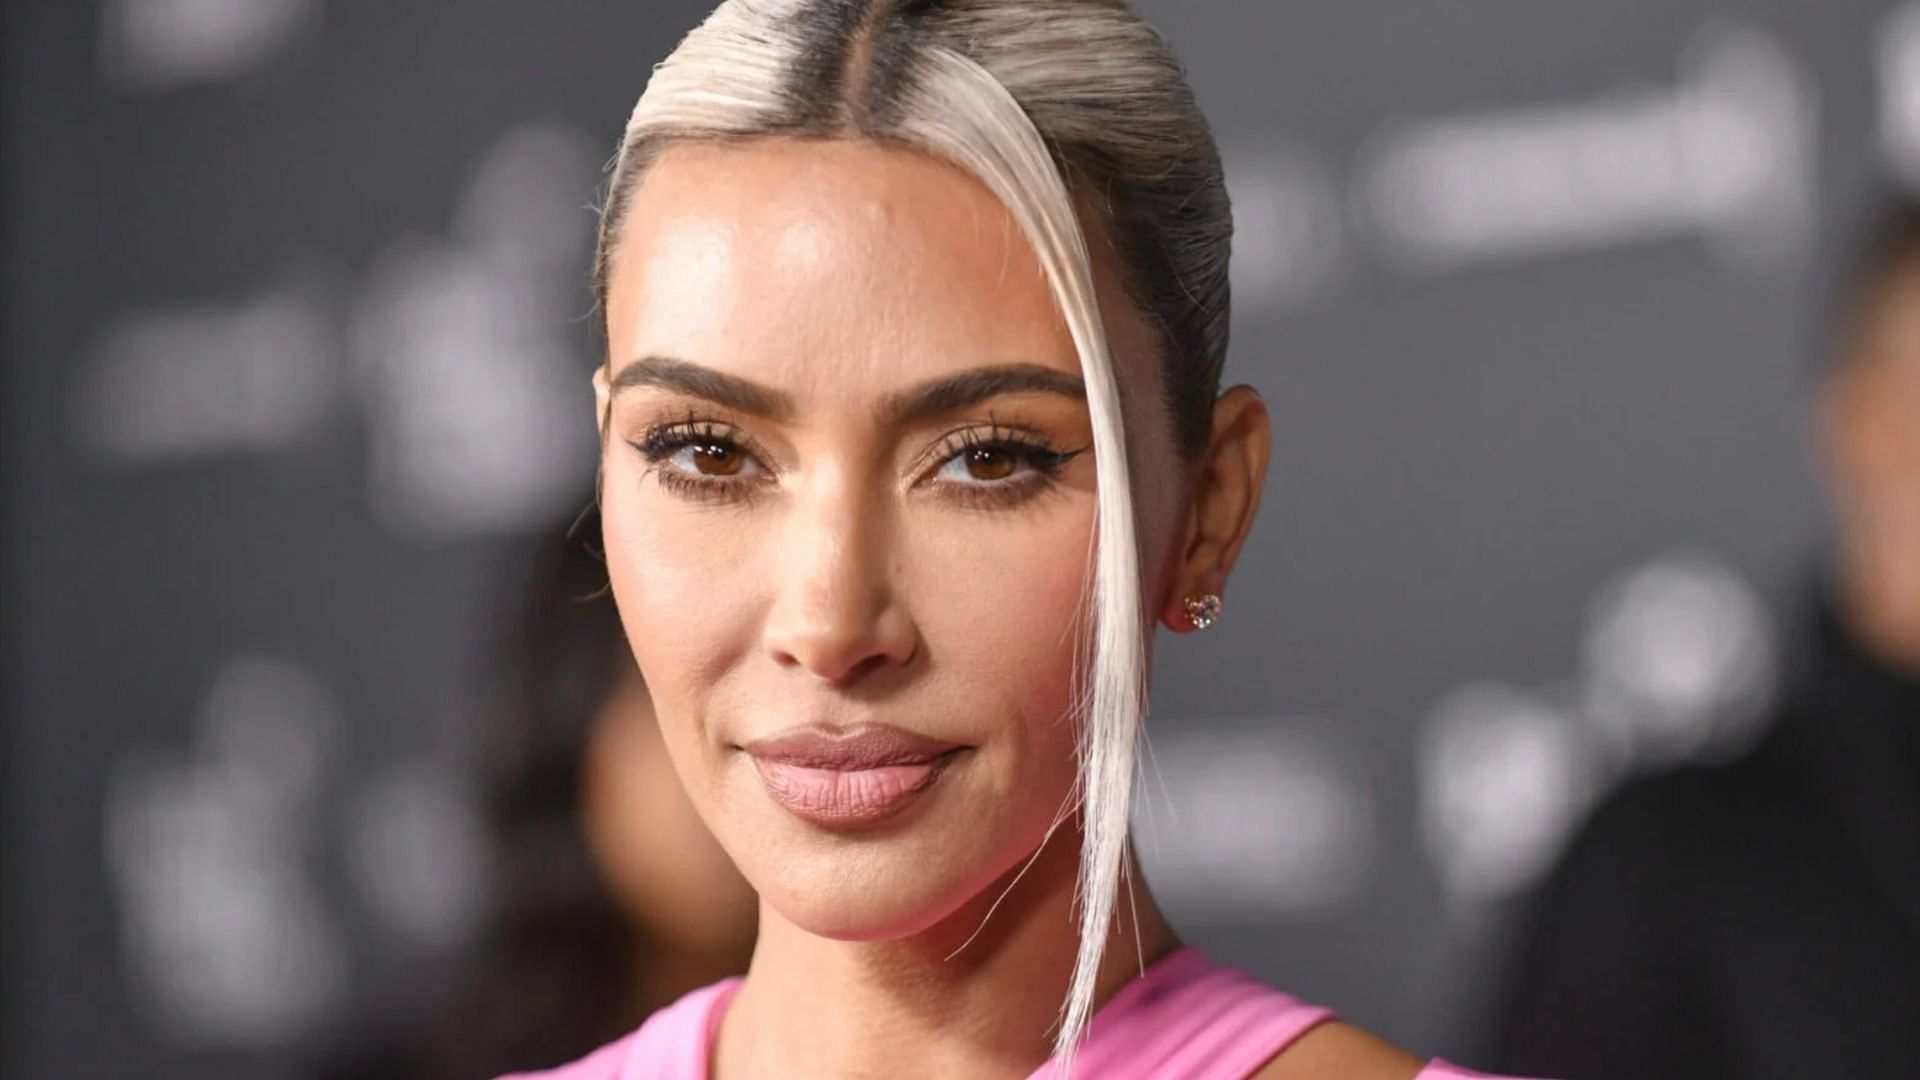 “We stay silent through all the lies”: Kim Kardashian opens up about ...